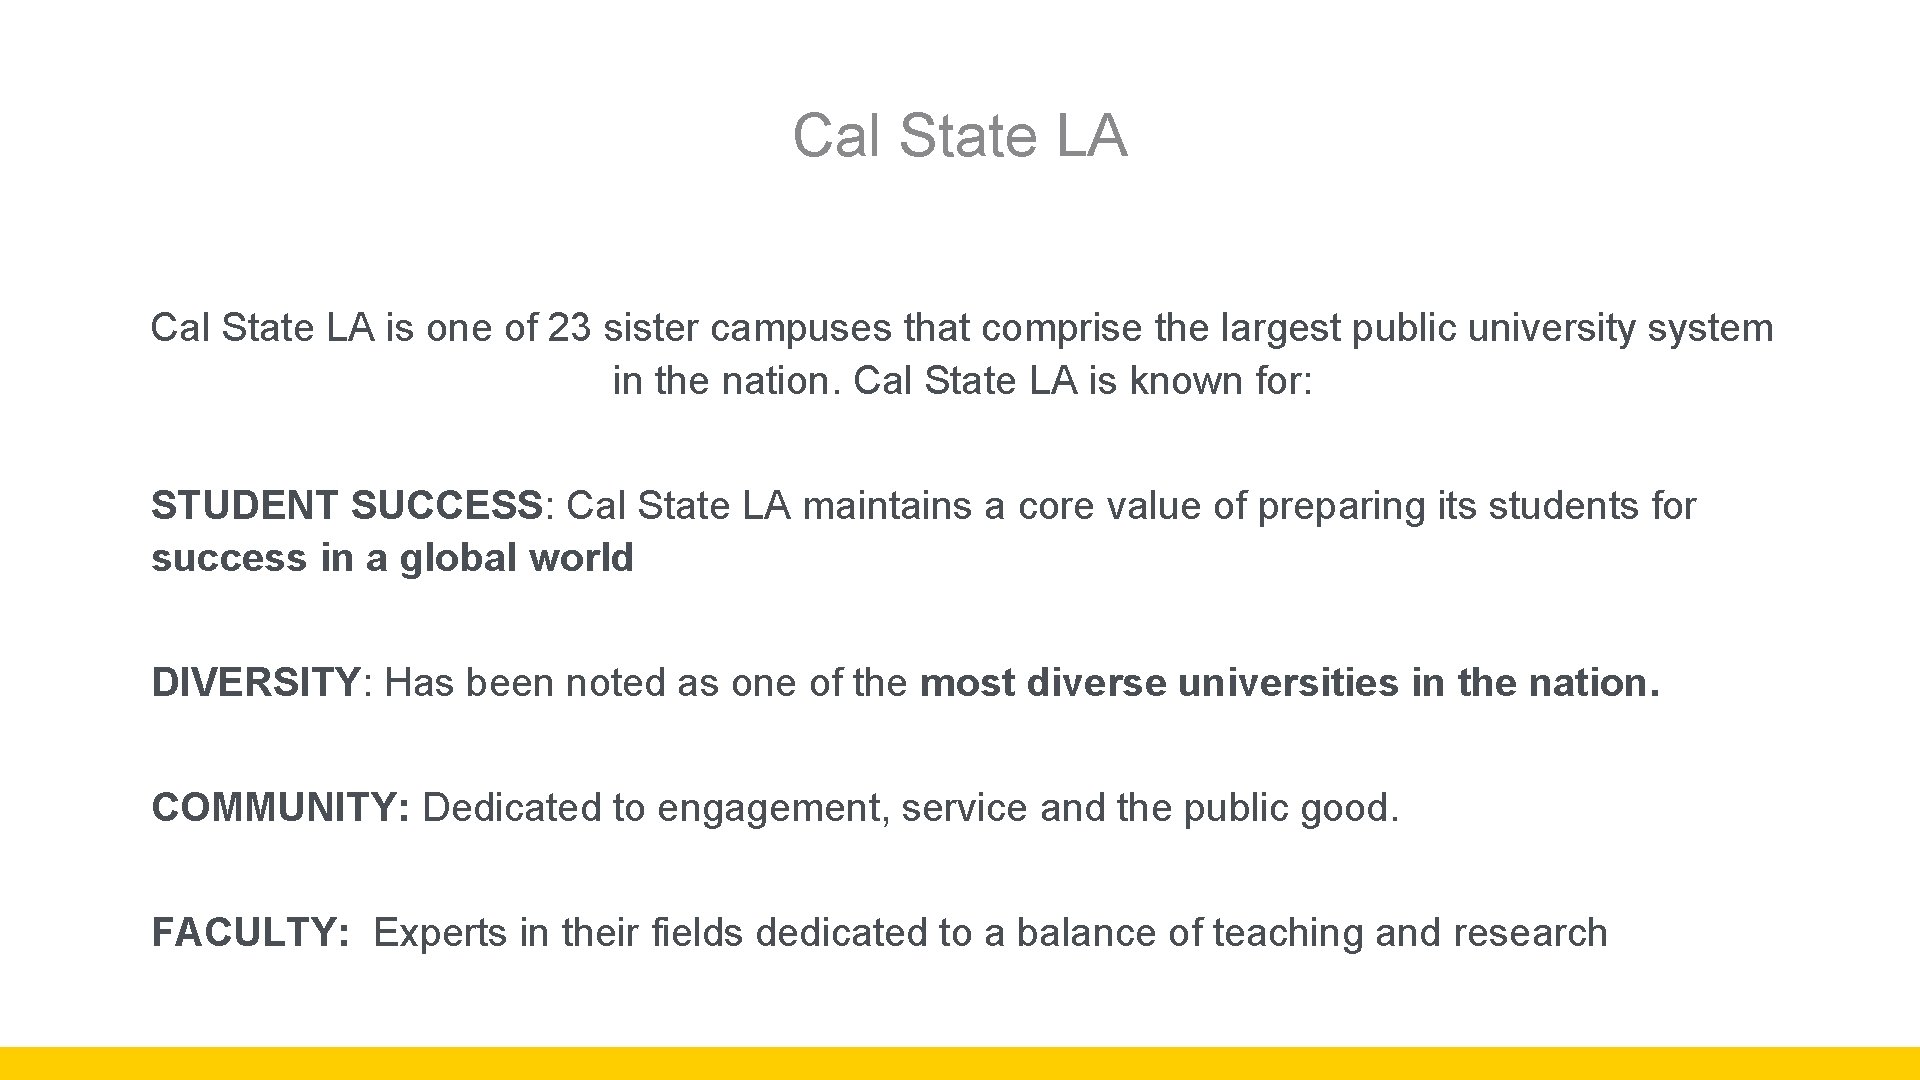 Cal State LA is one of 23 sister campuses that comprise the largest public